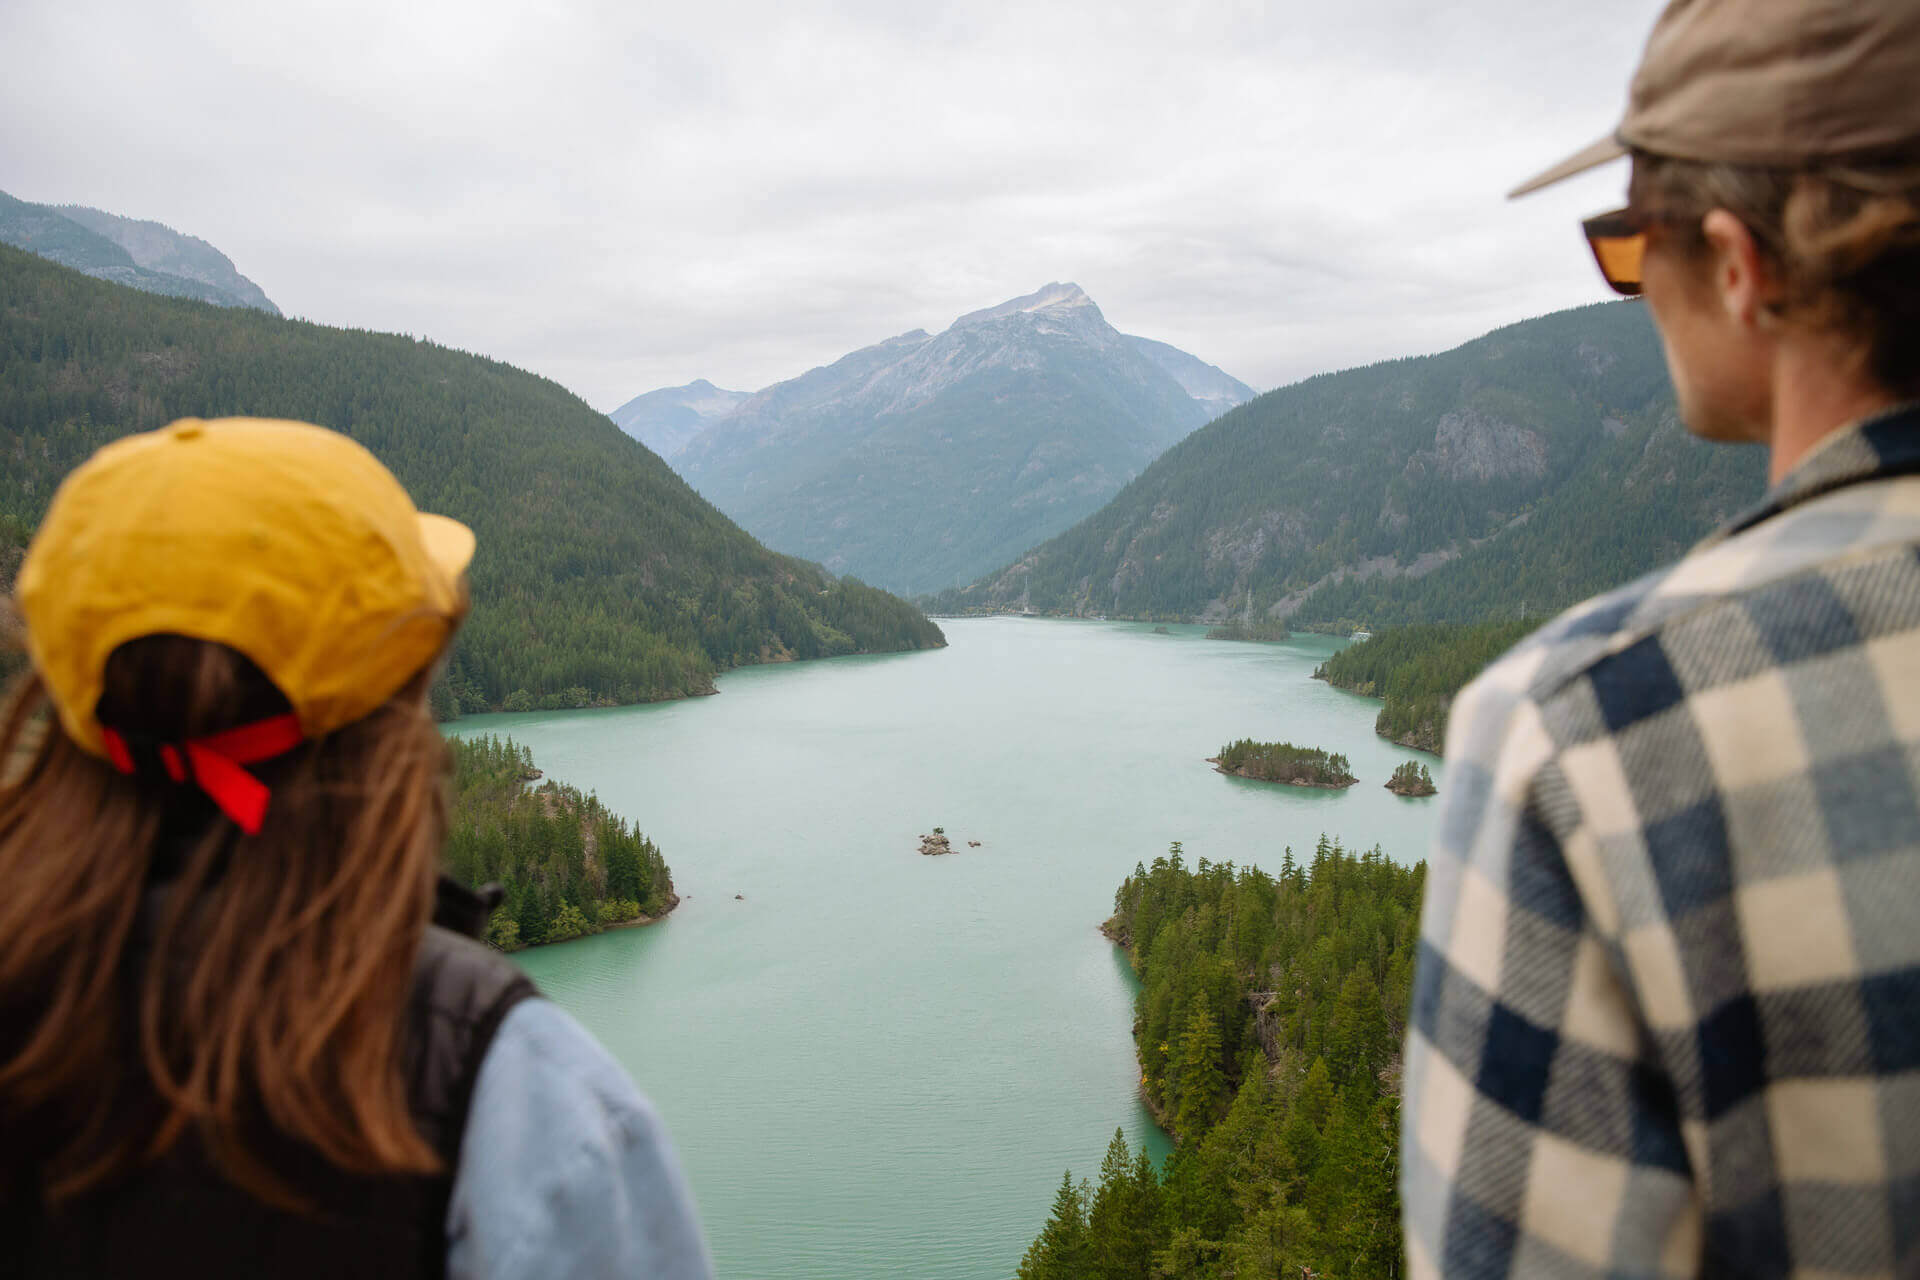 A man and woman stand at viewpoint overlooking Diablo Lake in North Cascades National Park.